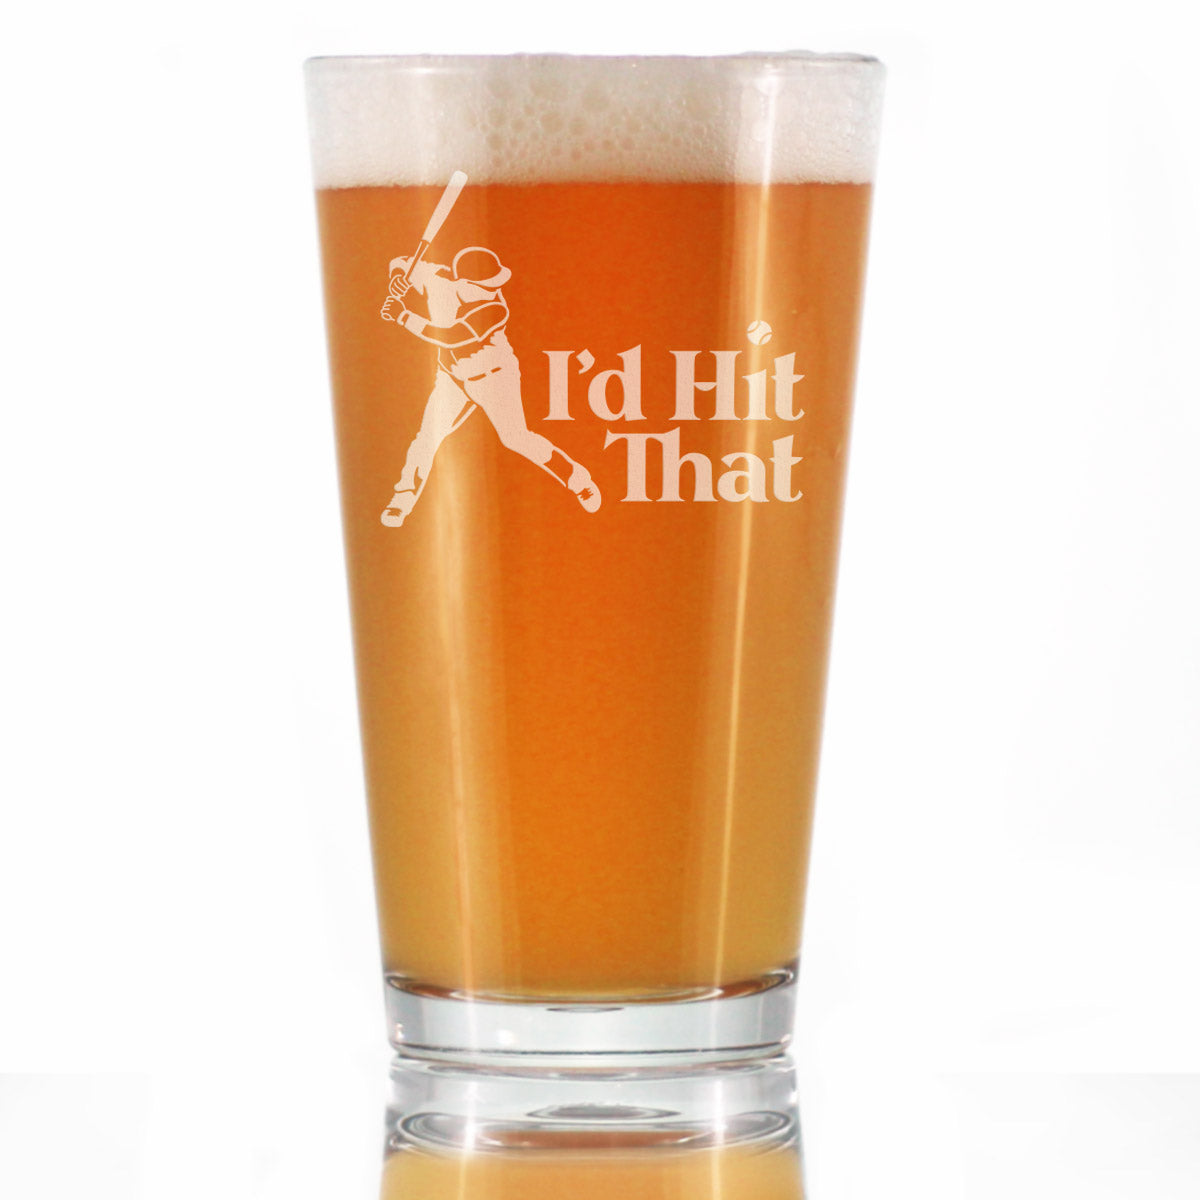 I'd Hit That - Pint Glass for Beer - Baseball Themed Gifts and Sports Decor - 16 oz Glasses